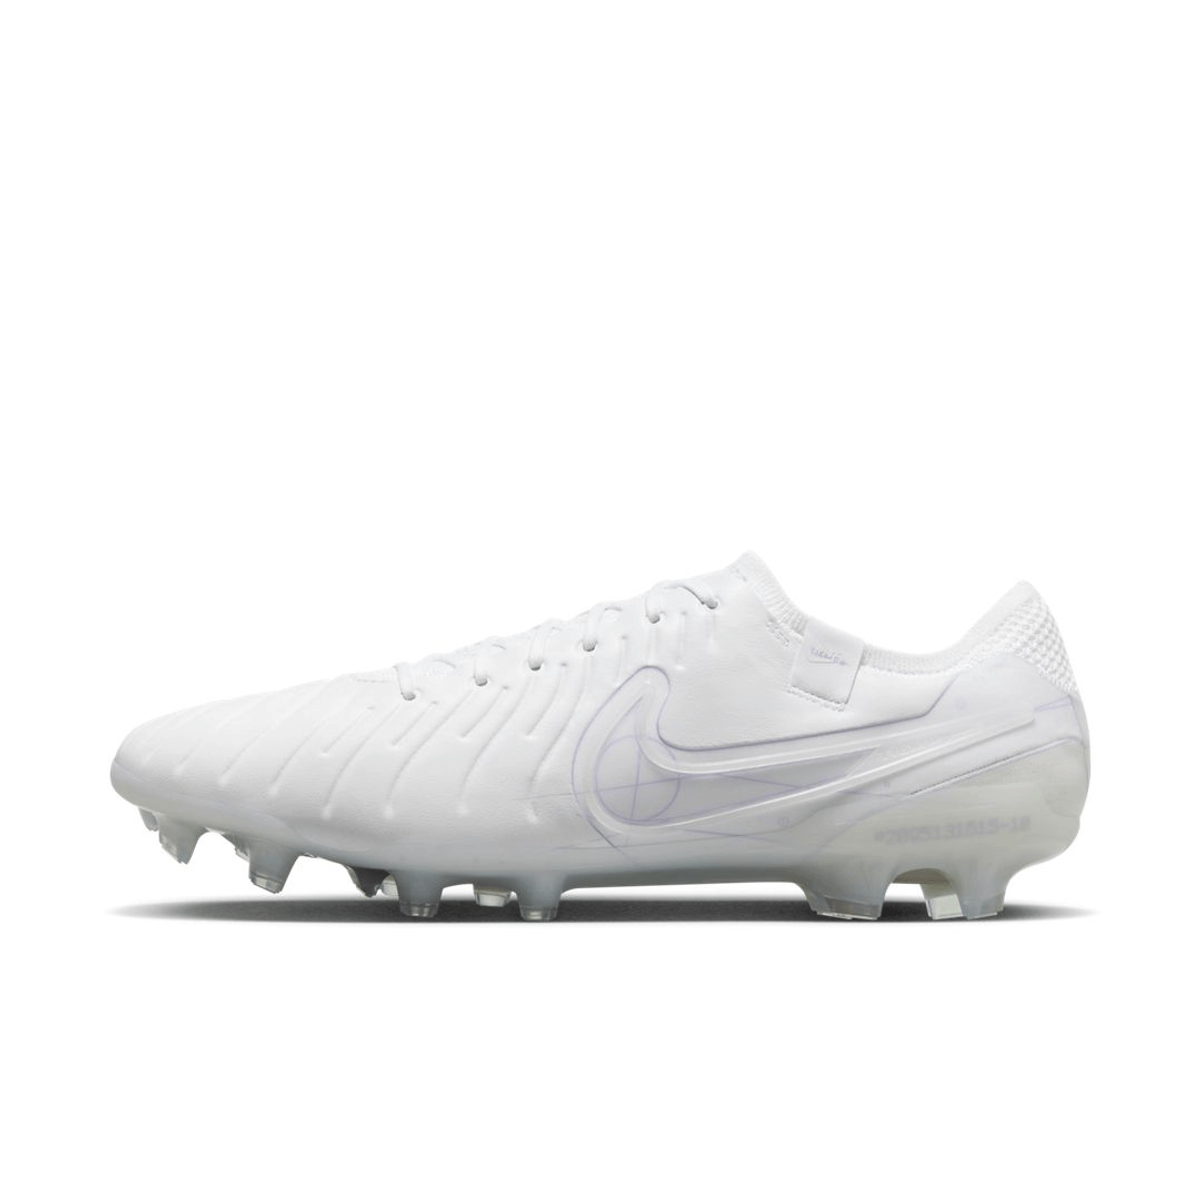 Nike Just Dropped The Limited-Edition Tiempo Legend 10 "Prototype" Boot In White